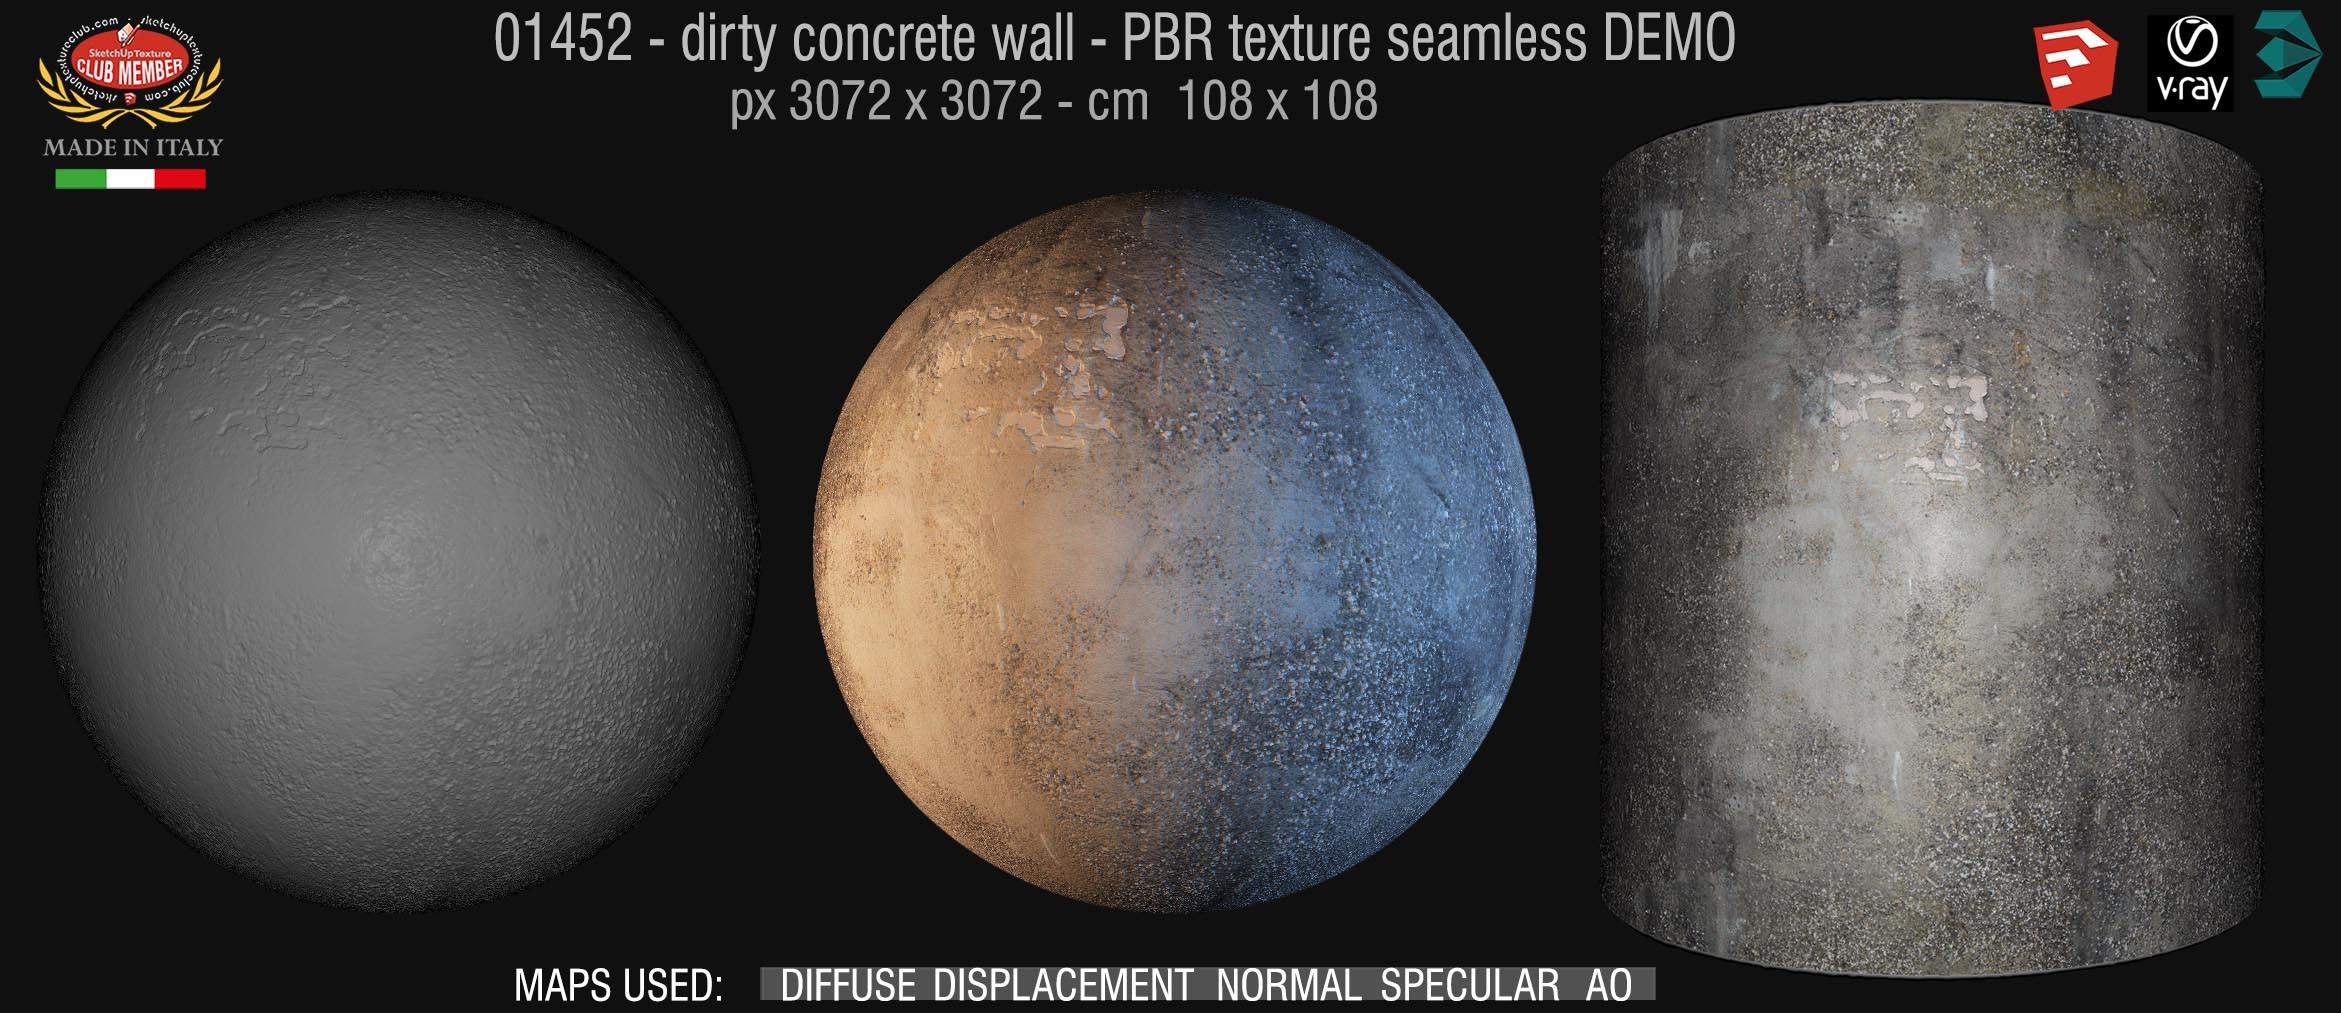 01452 Concrete bare dirty wall PBR texture seamless DEMO